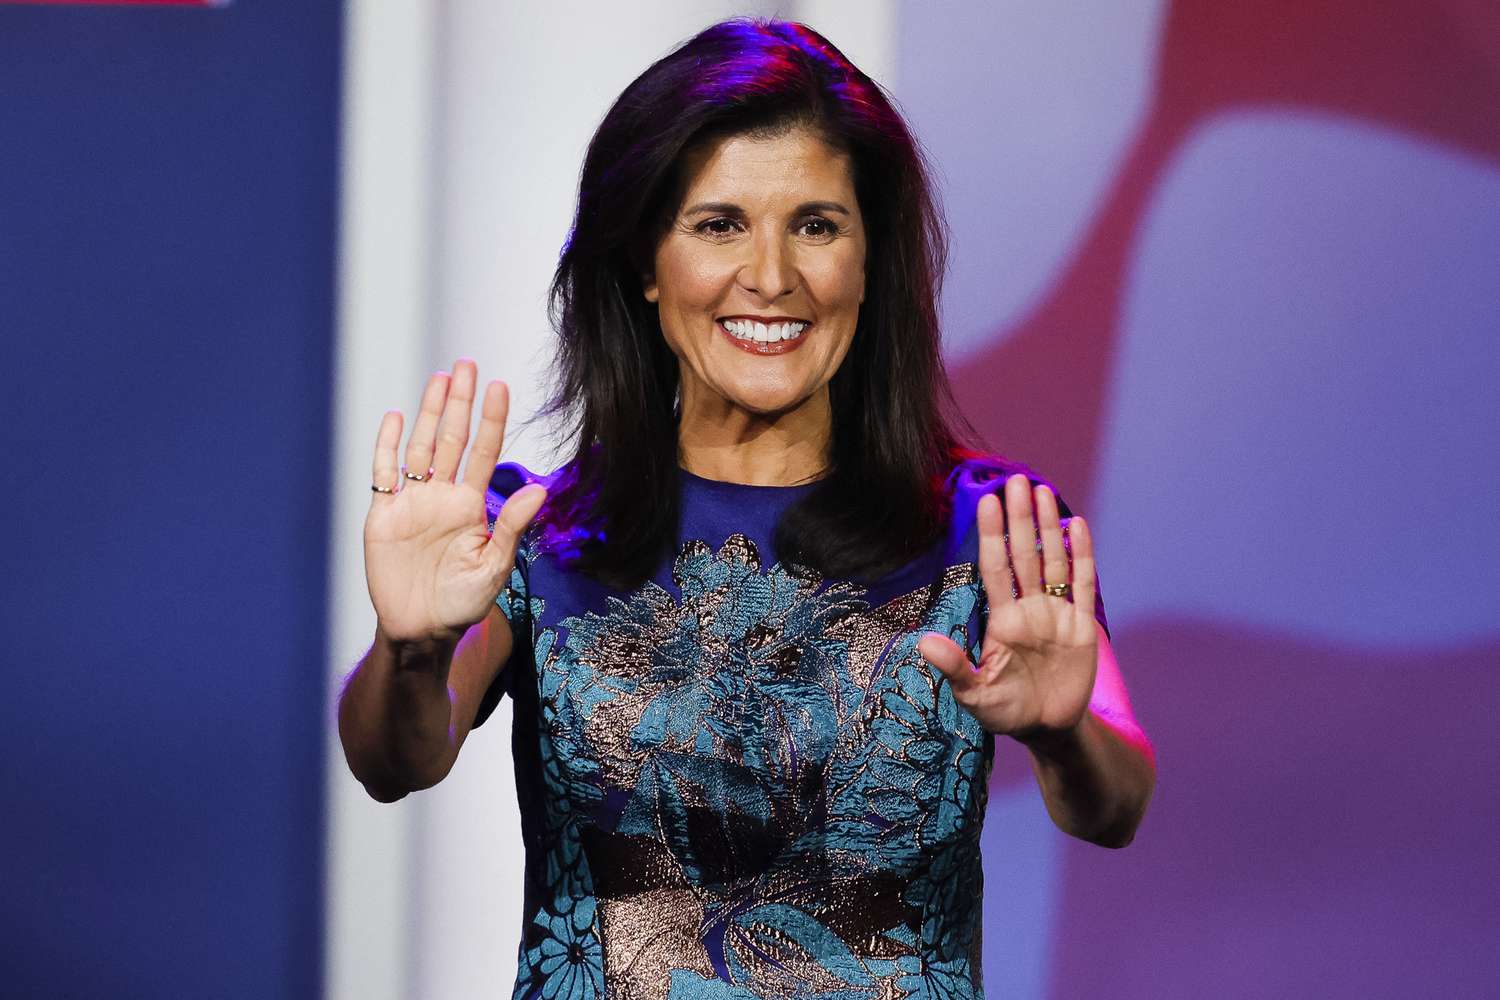 Nikki Haley’s Apology Tour And The ‘Black Friends’ Defense